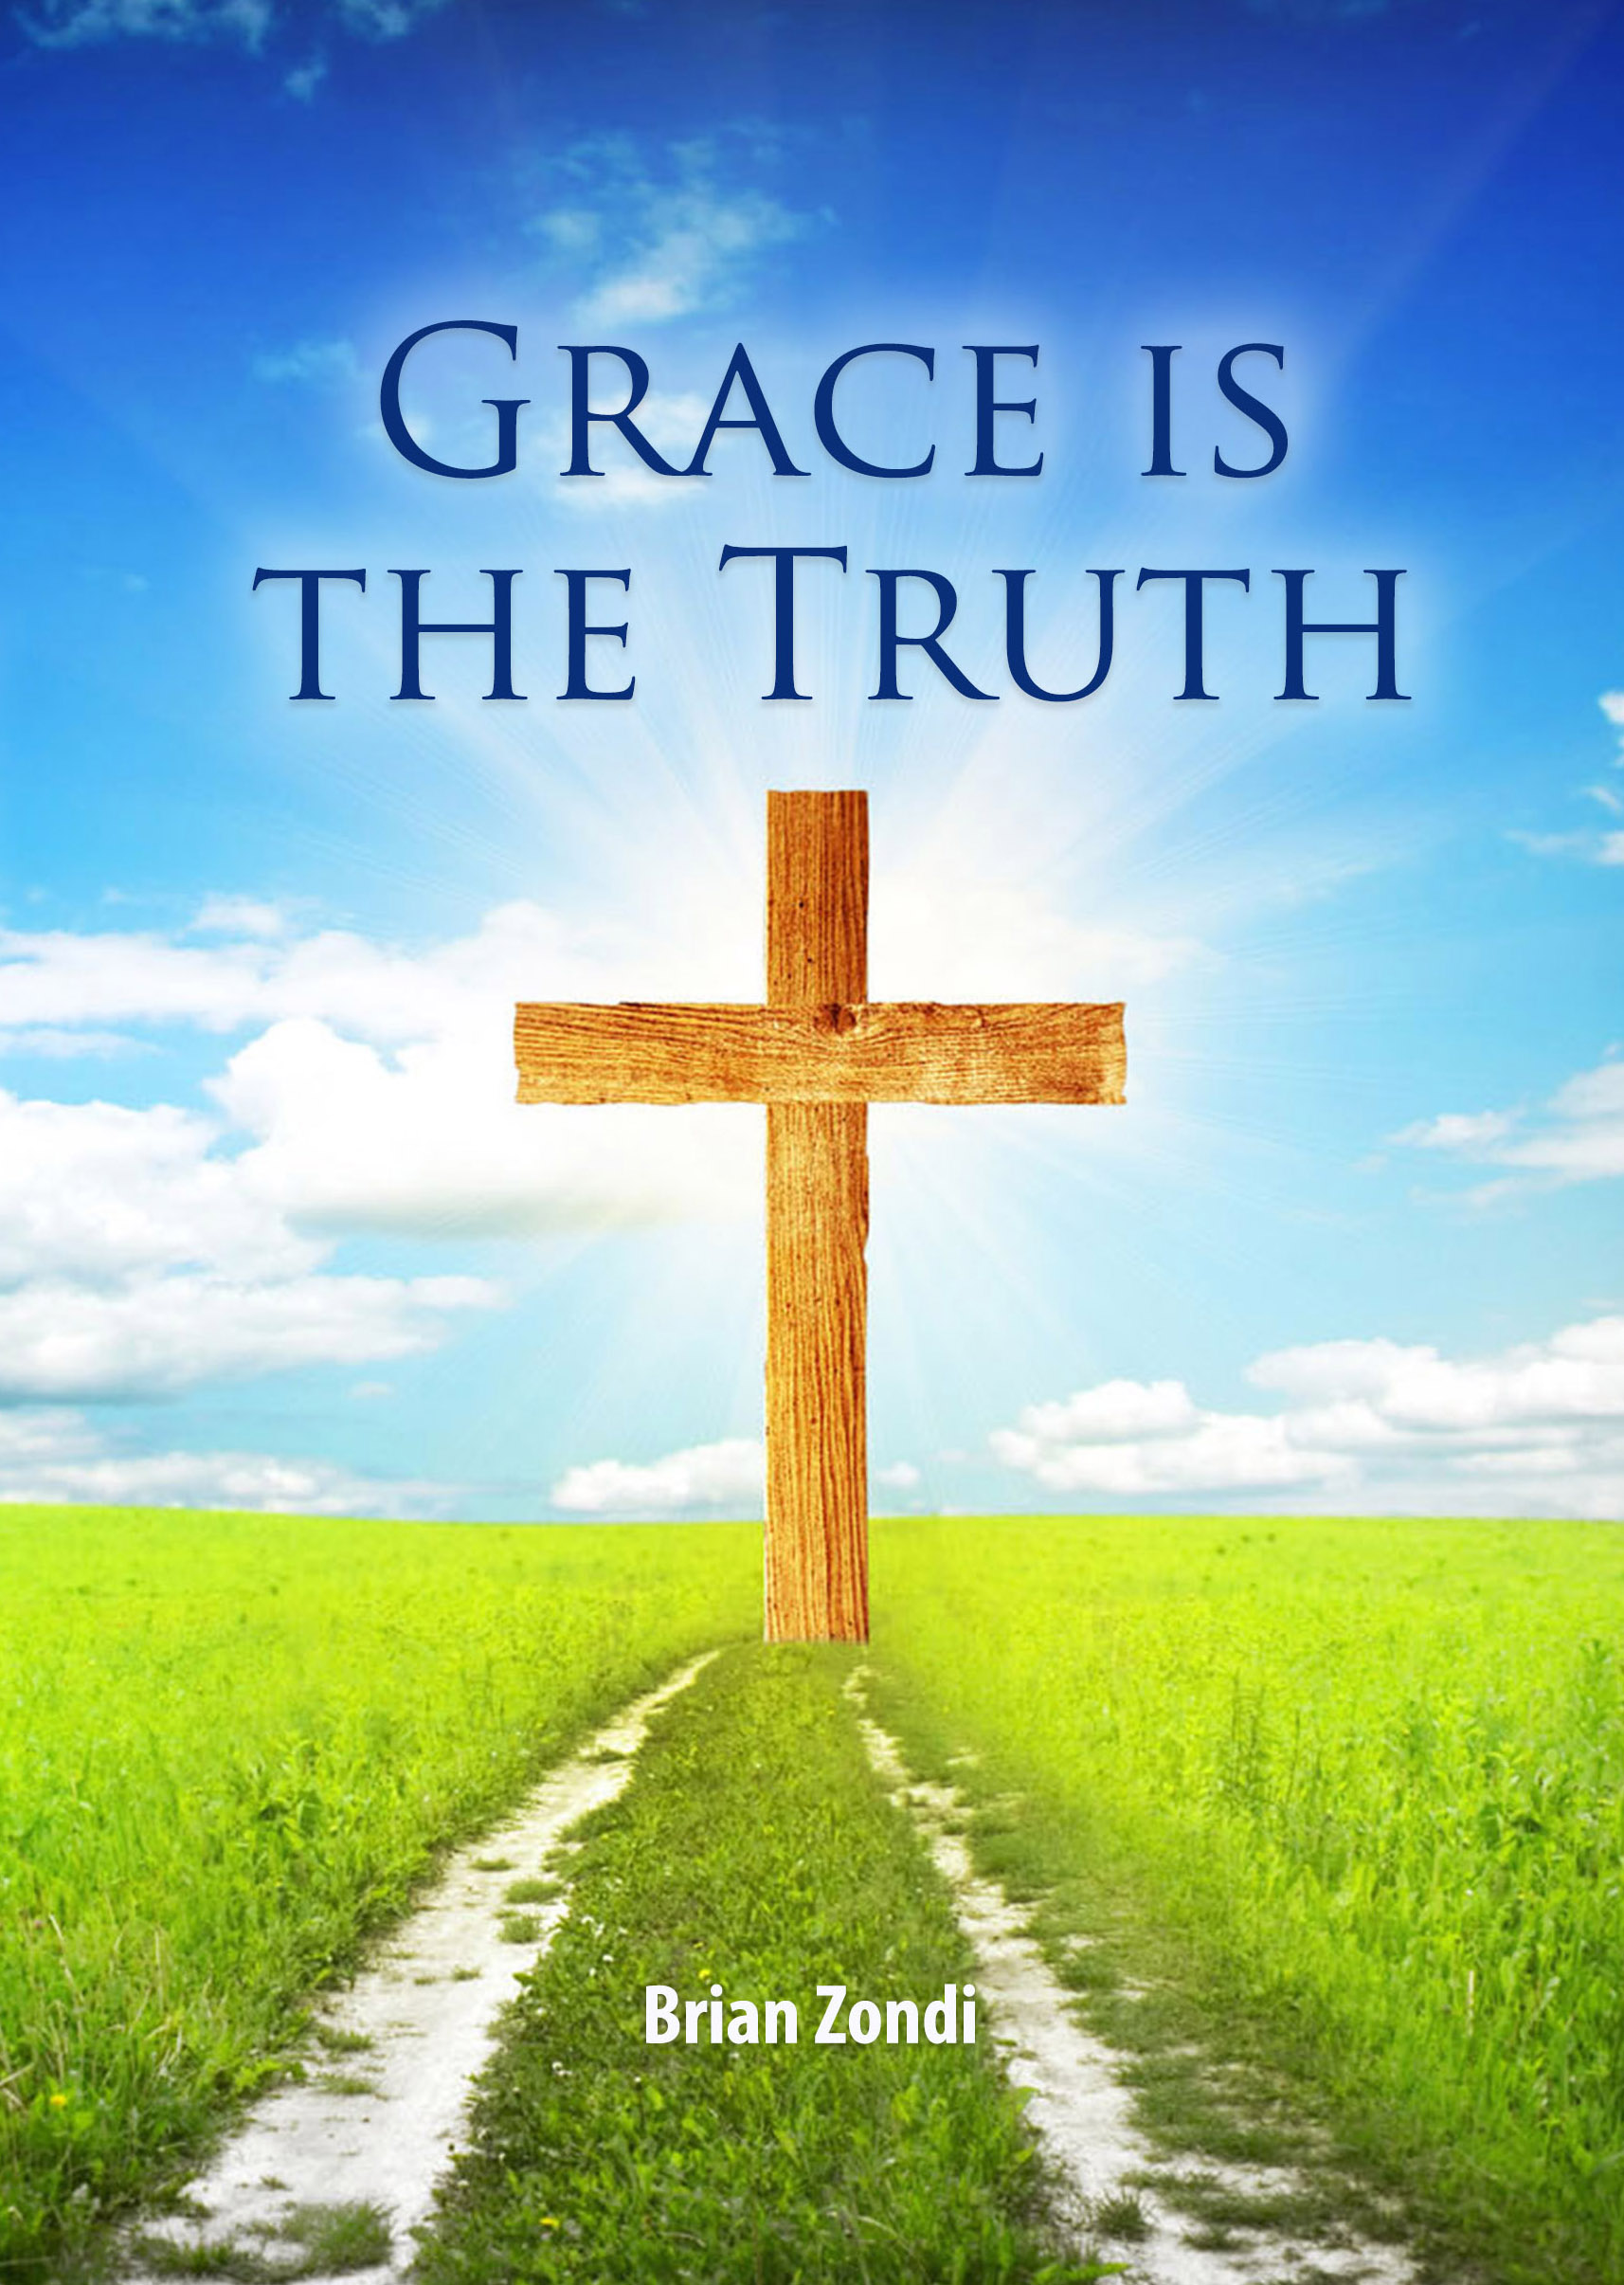 FREE: Grace is the Truth by Brian Zondi